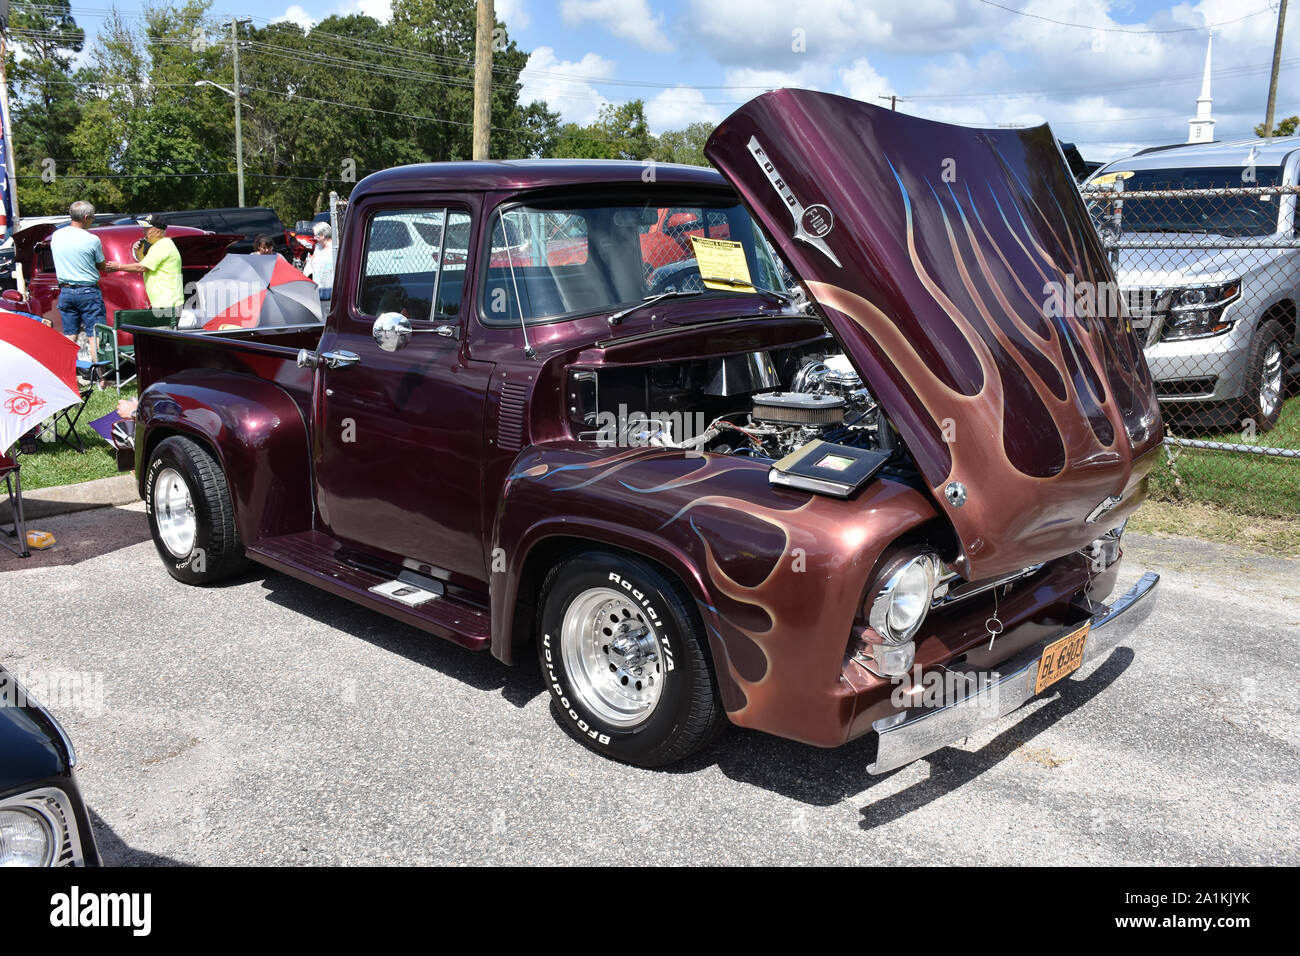 A 1956 Ford Pickup Truck On Display At A Car Show Stock